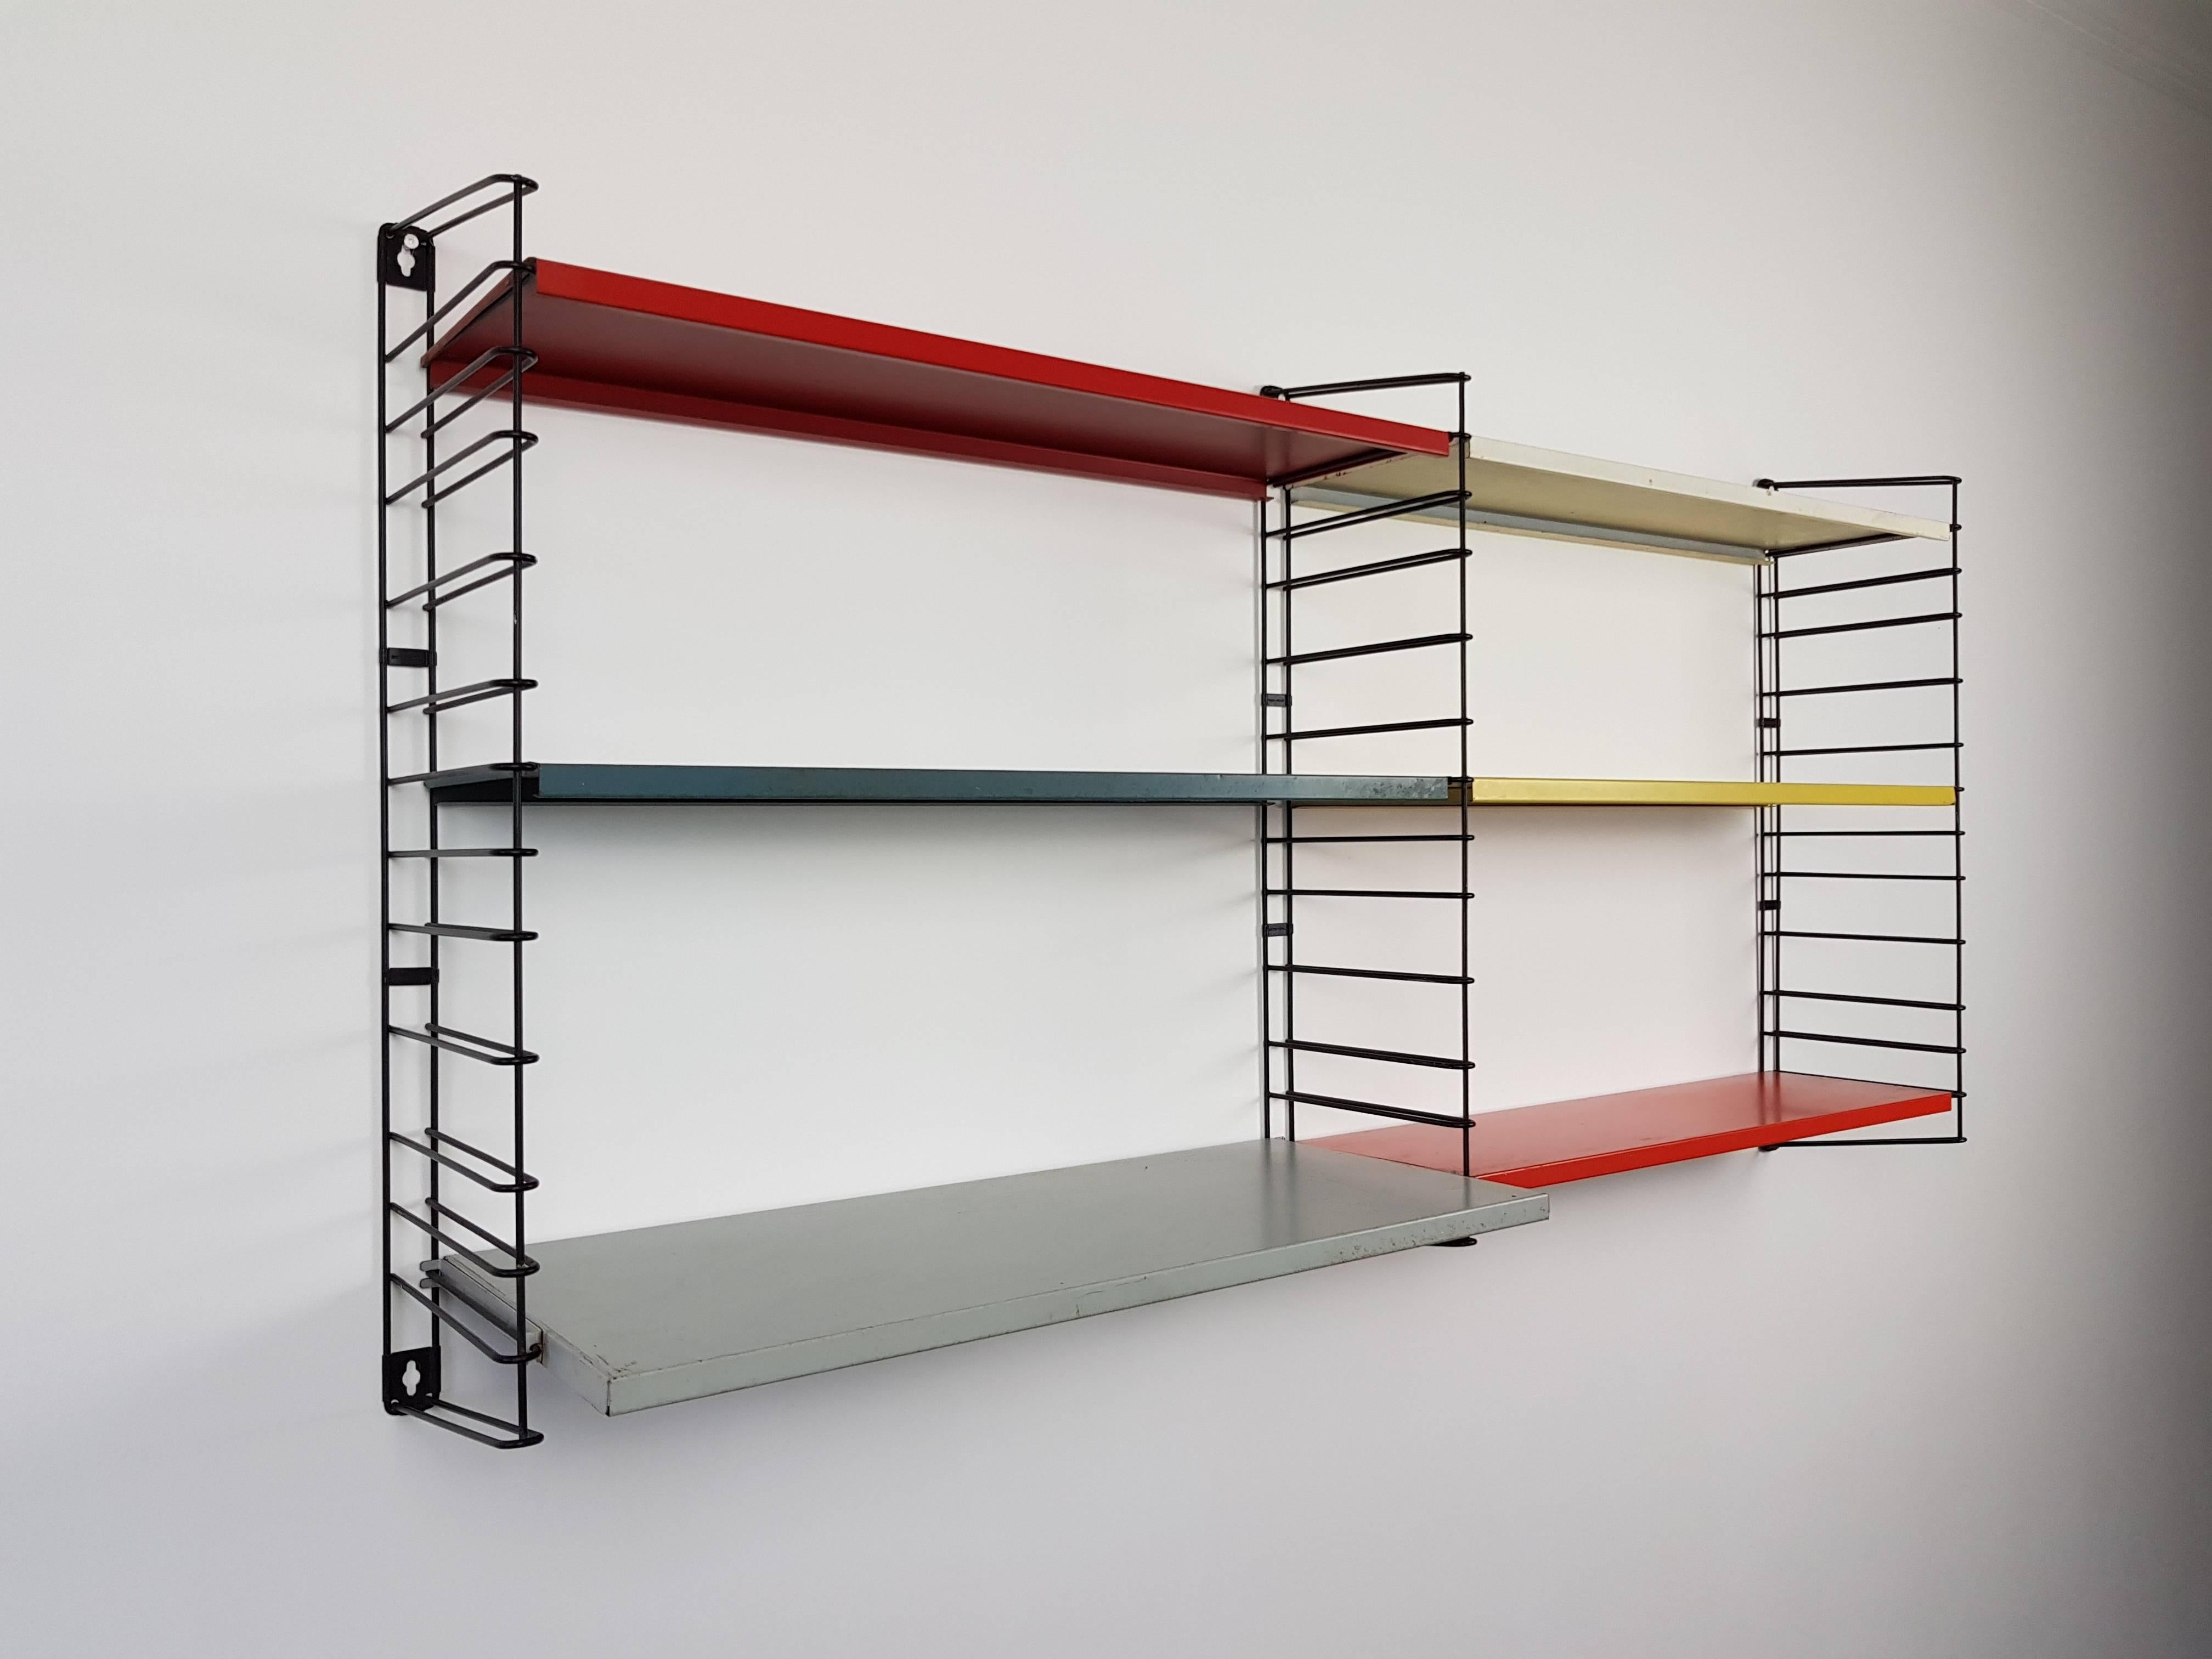 Mid-Century Modern Dutch Tomado Hanging Wall Shelves, Designed in the 1950s by A. Dekker